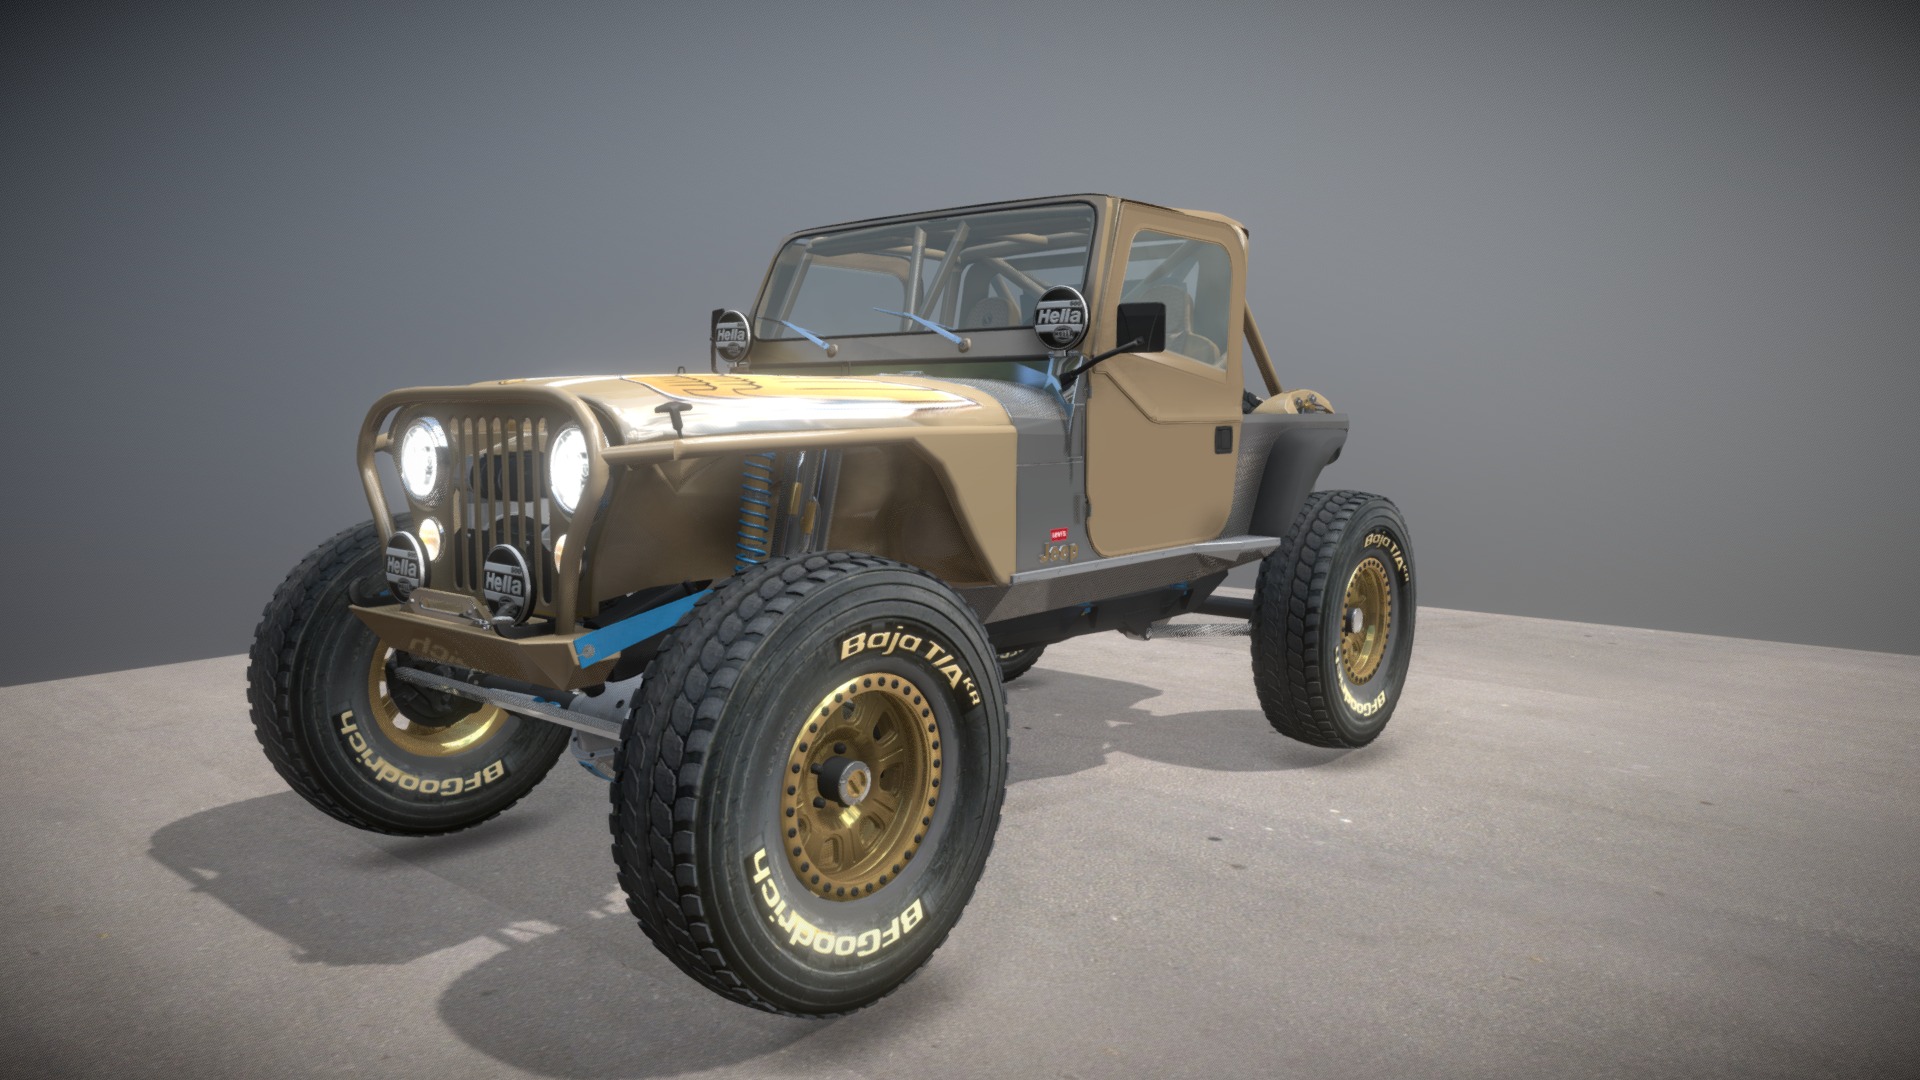 Detailed 3d model of jeep Cj 7 Golden Eagle rock crawler competition, Complete Interior and Exterior detail, Mechanical component, motor, transmission, axles, and brakes.
Realistic Texture and Decal - Jeep CJ-7 Off Road KOH - 3D model by desfi 3d model